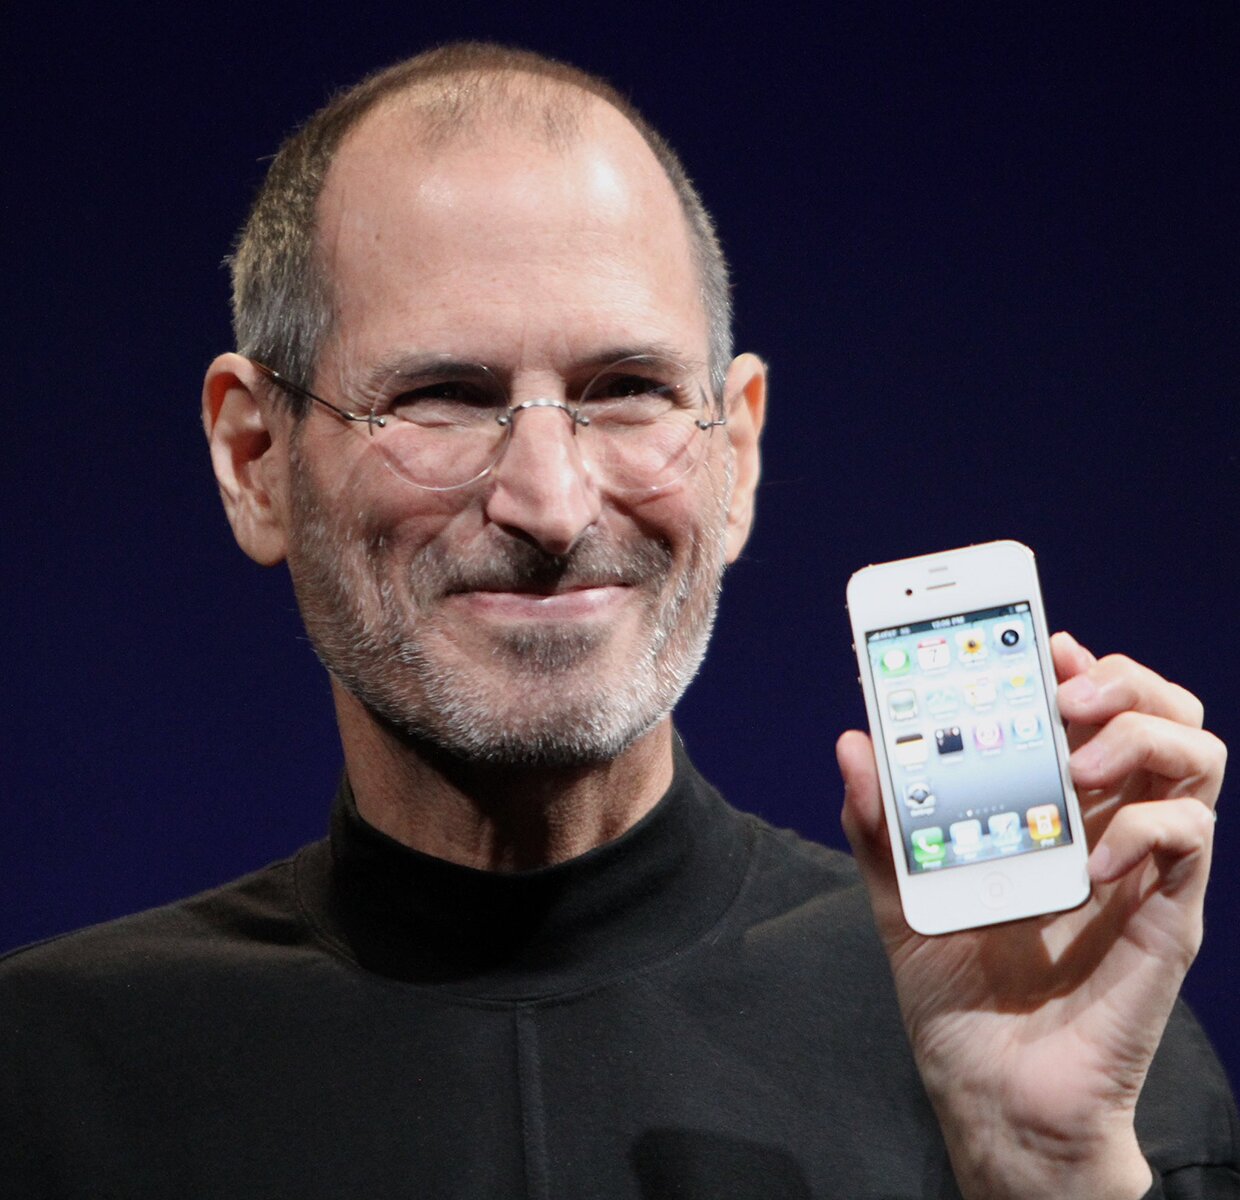 Steve-Jobs-The-Main-Architect-Behind-The-iPhone-Whos-Father-Was-A-Syrian-Muslim.jpg